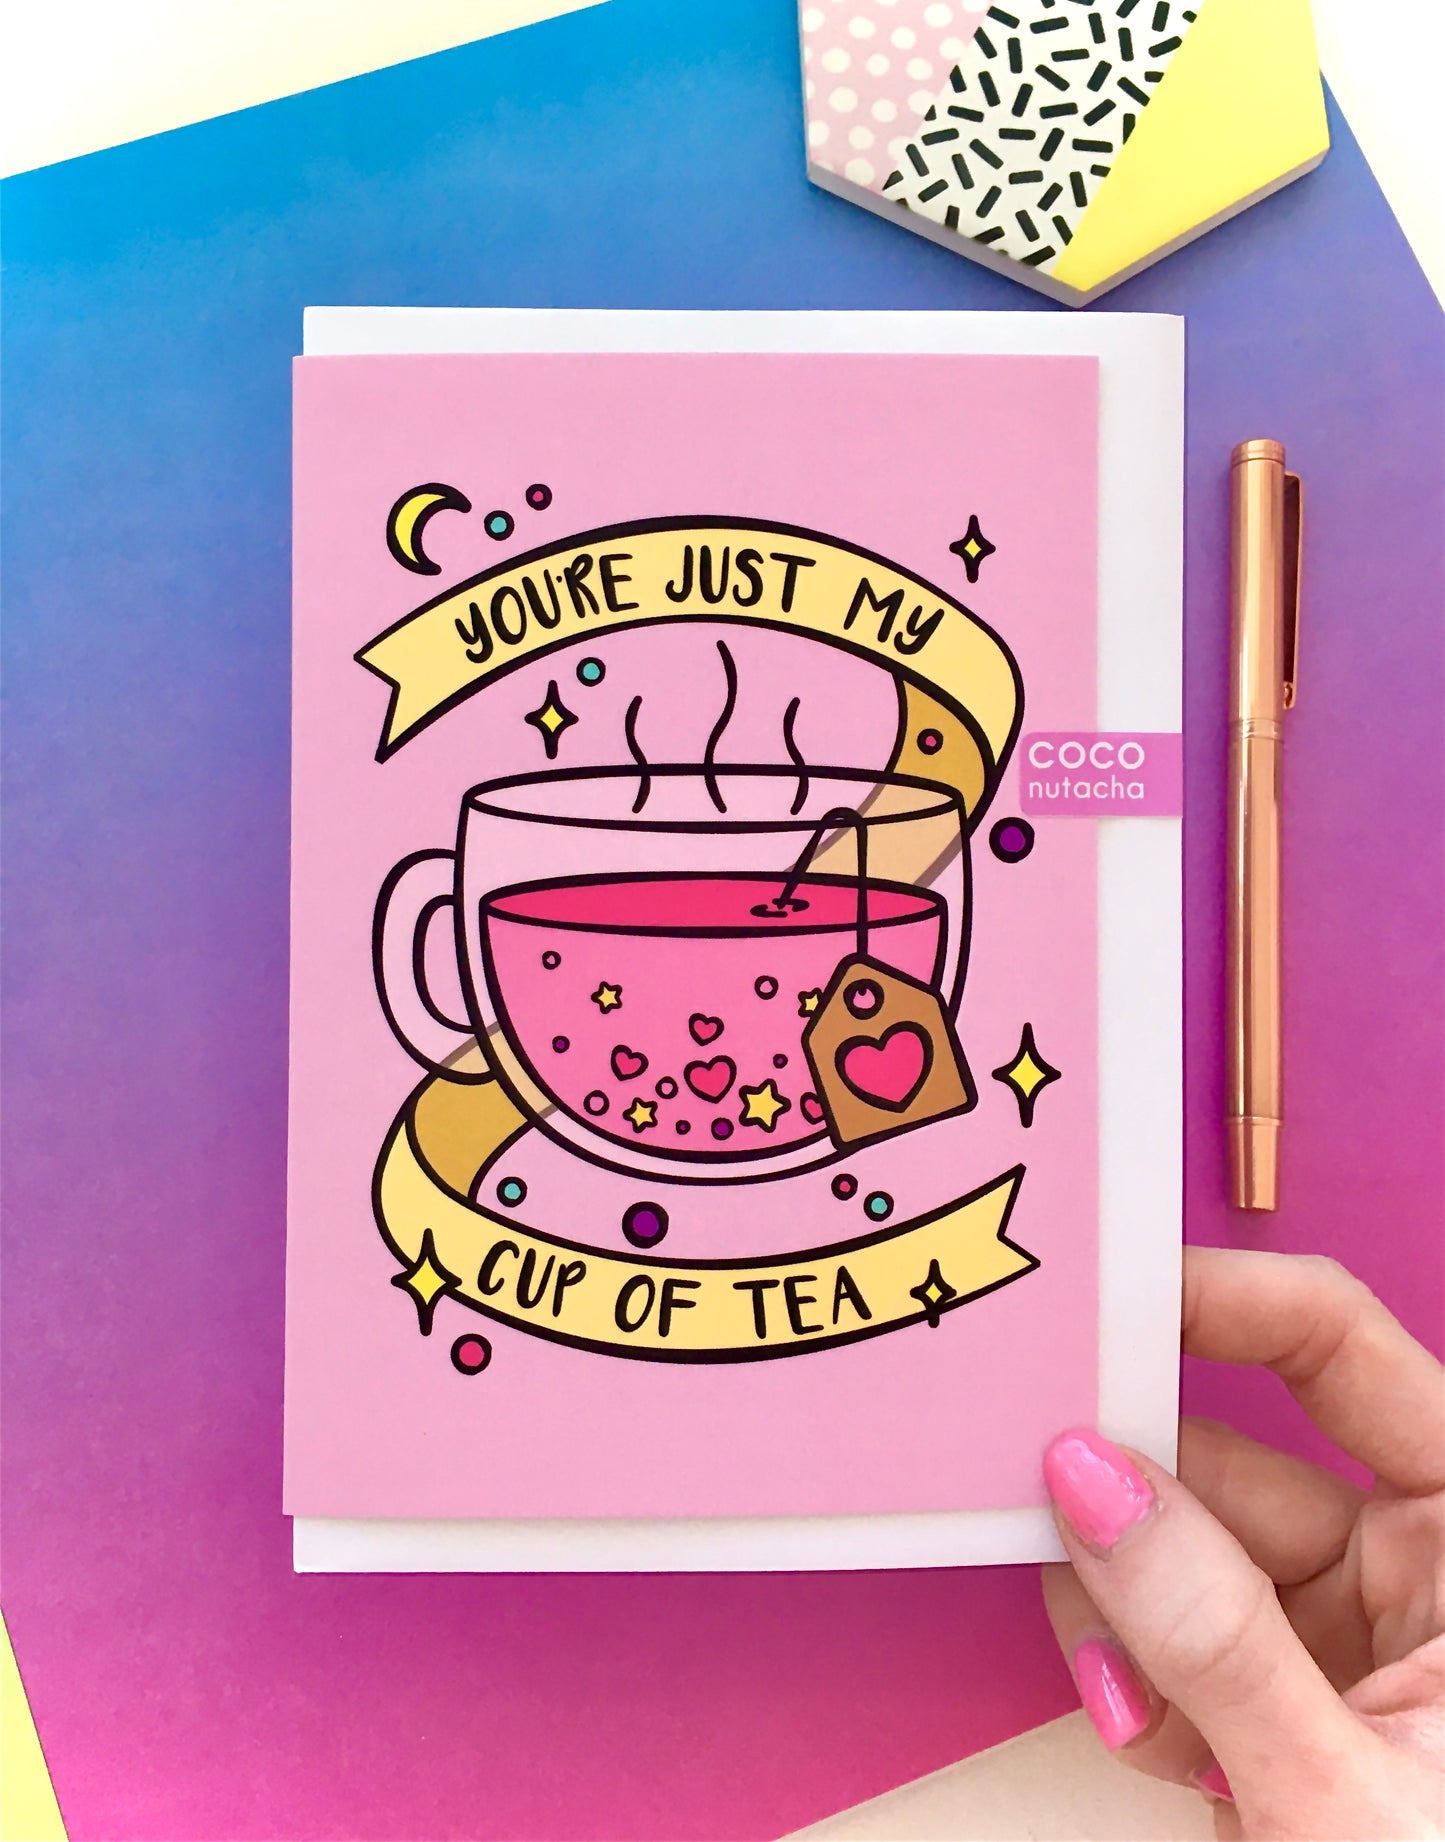 My Cup of Tea Greeting Card